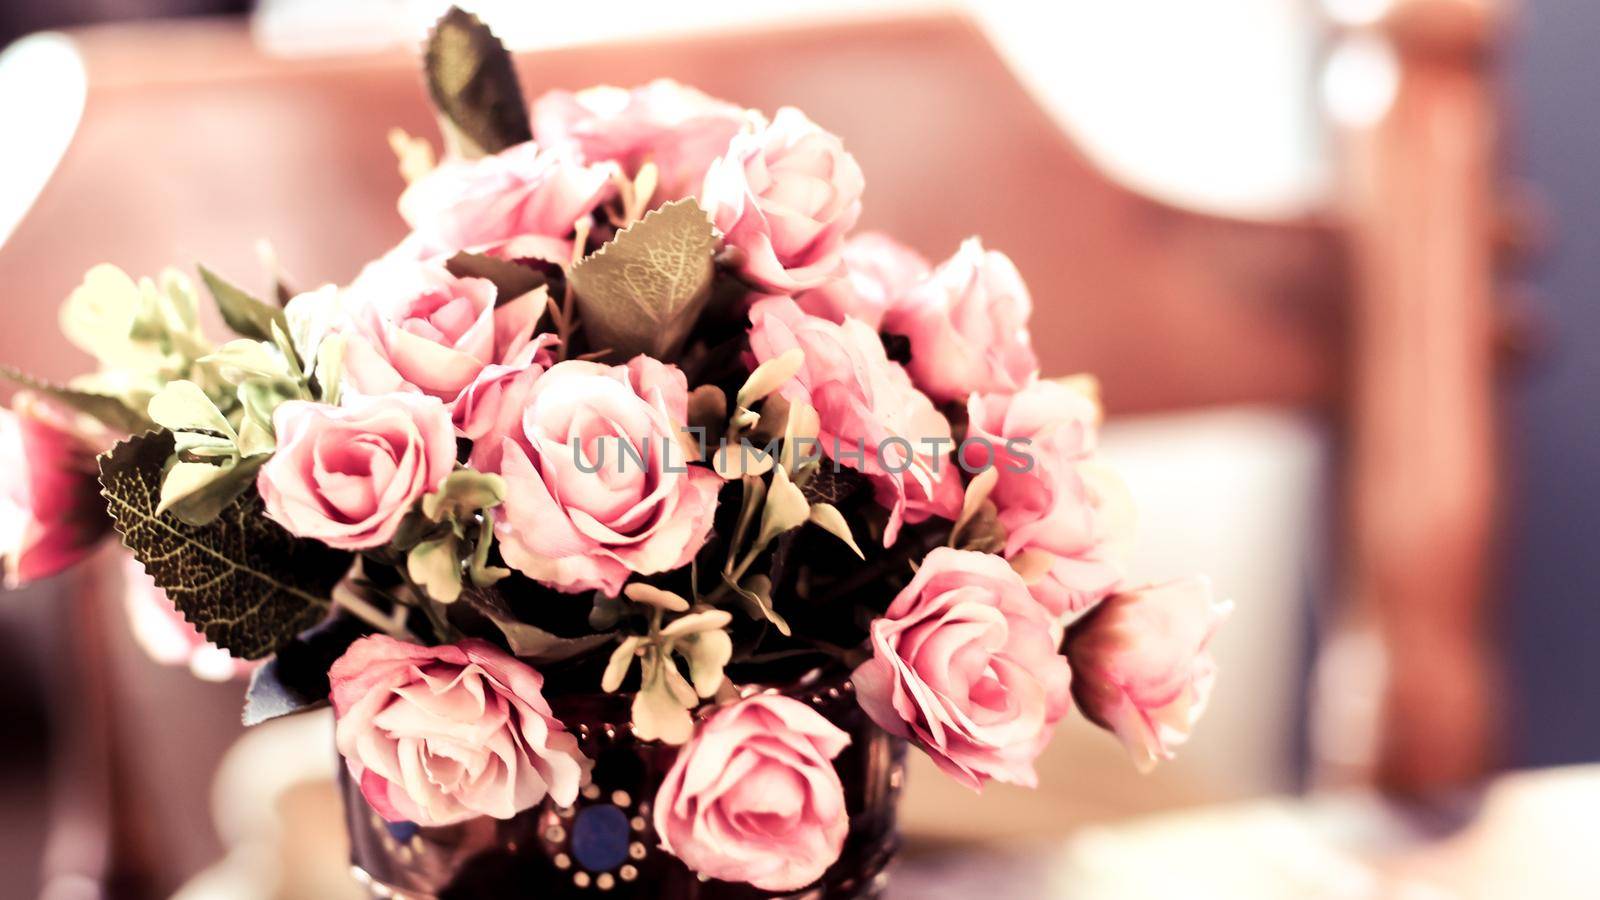 Bouquet vintage group of pink roses on wooden table, soft focus by Petrichor